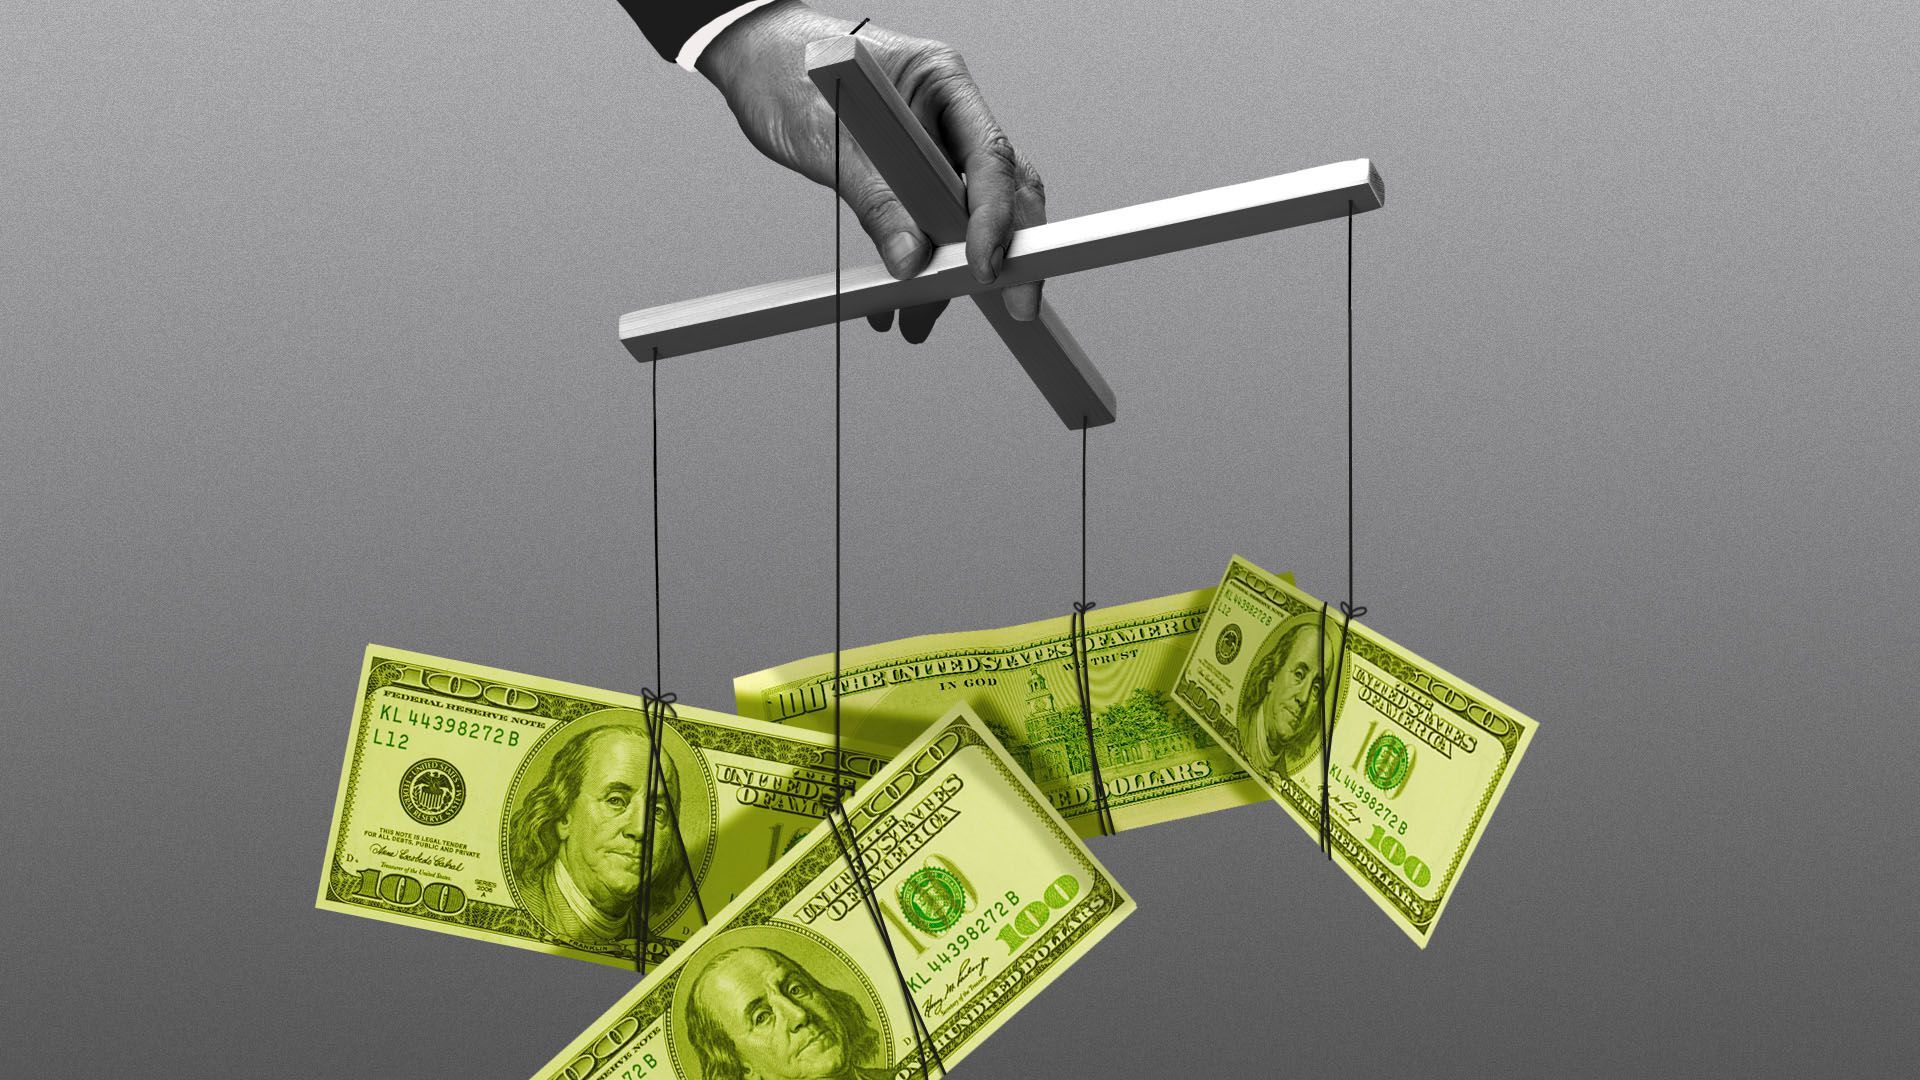 Illustration of a hand holding a marionette bar with hundred dollar bills attached to the strings.